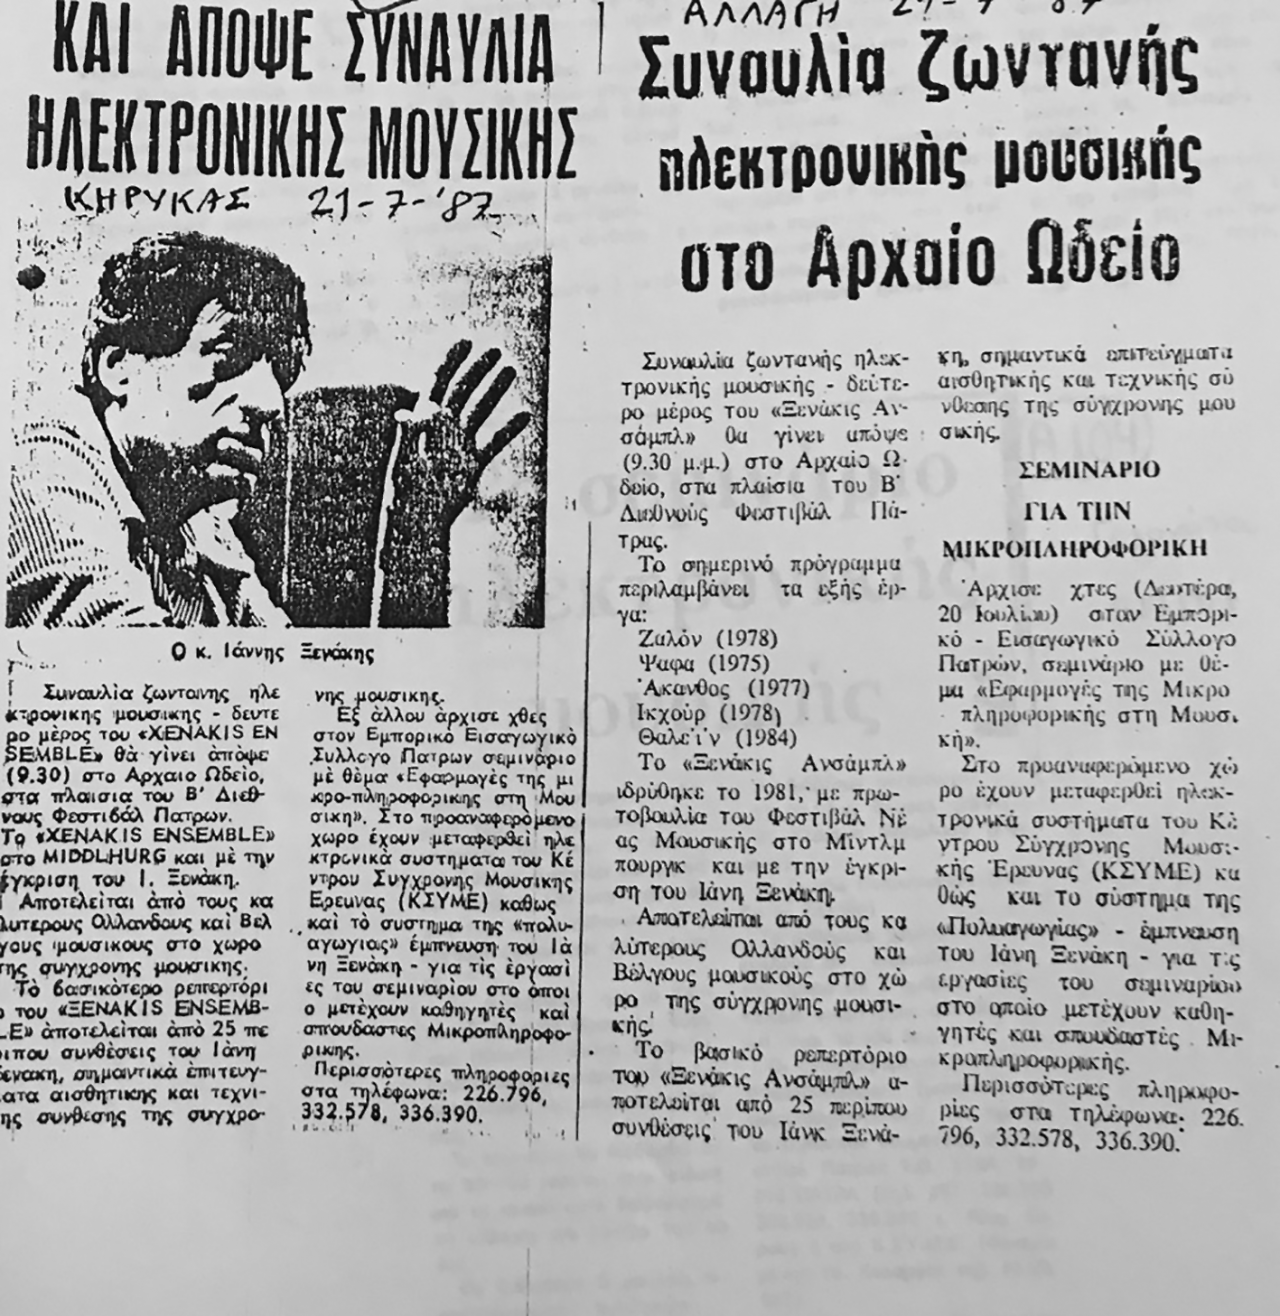 News clip on the presence of IX in Patra’s International Festival, the Xenakis Ensemble and the activities of KSYME during the festival, Jul. 1987